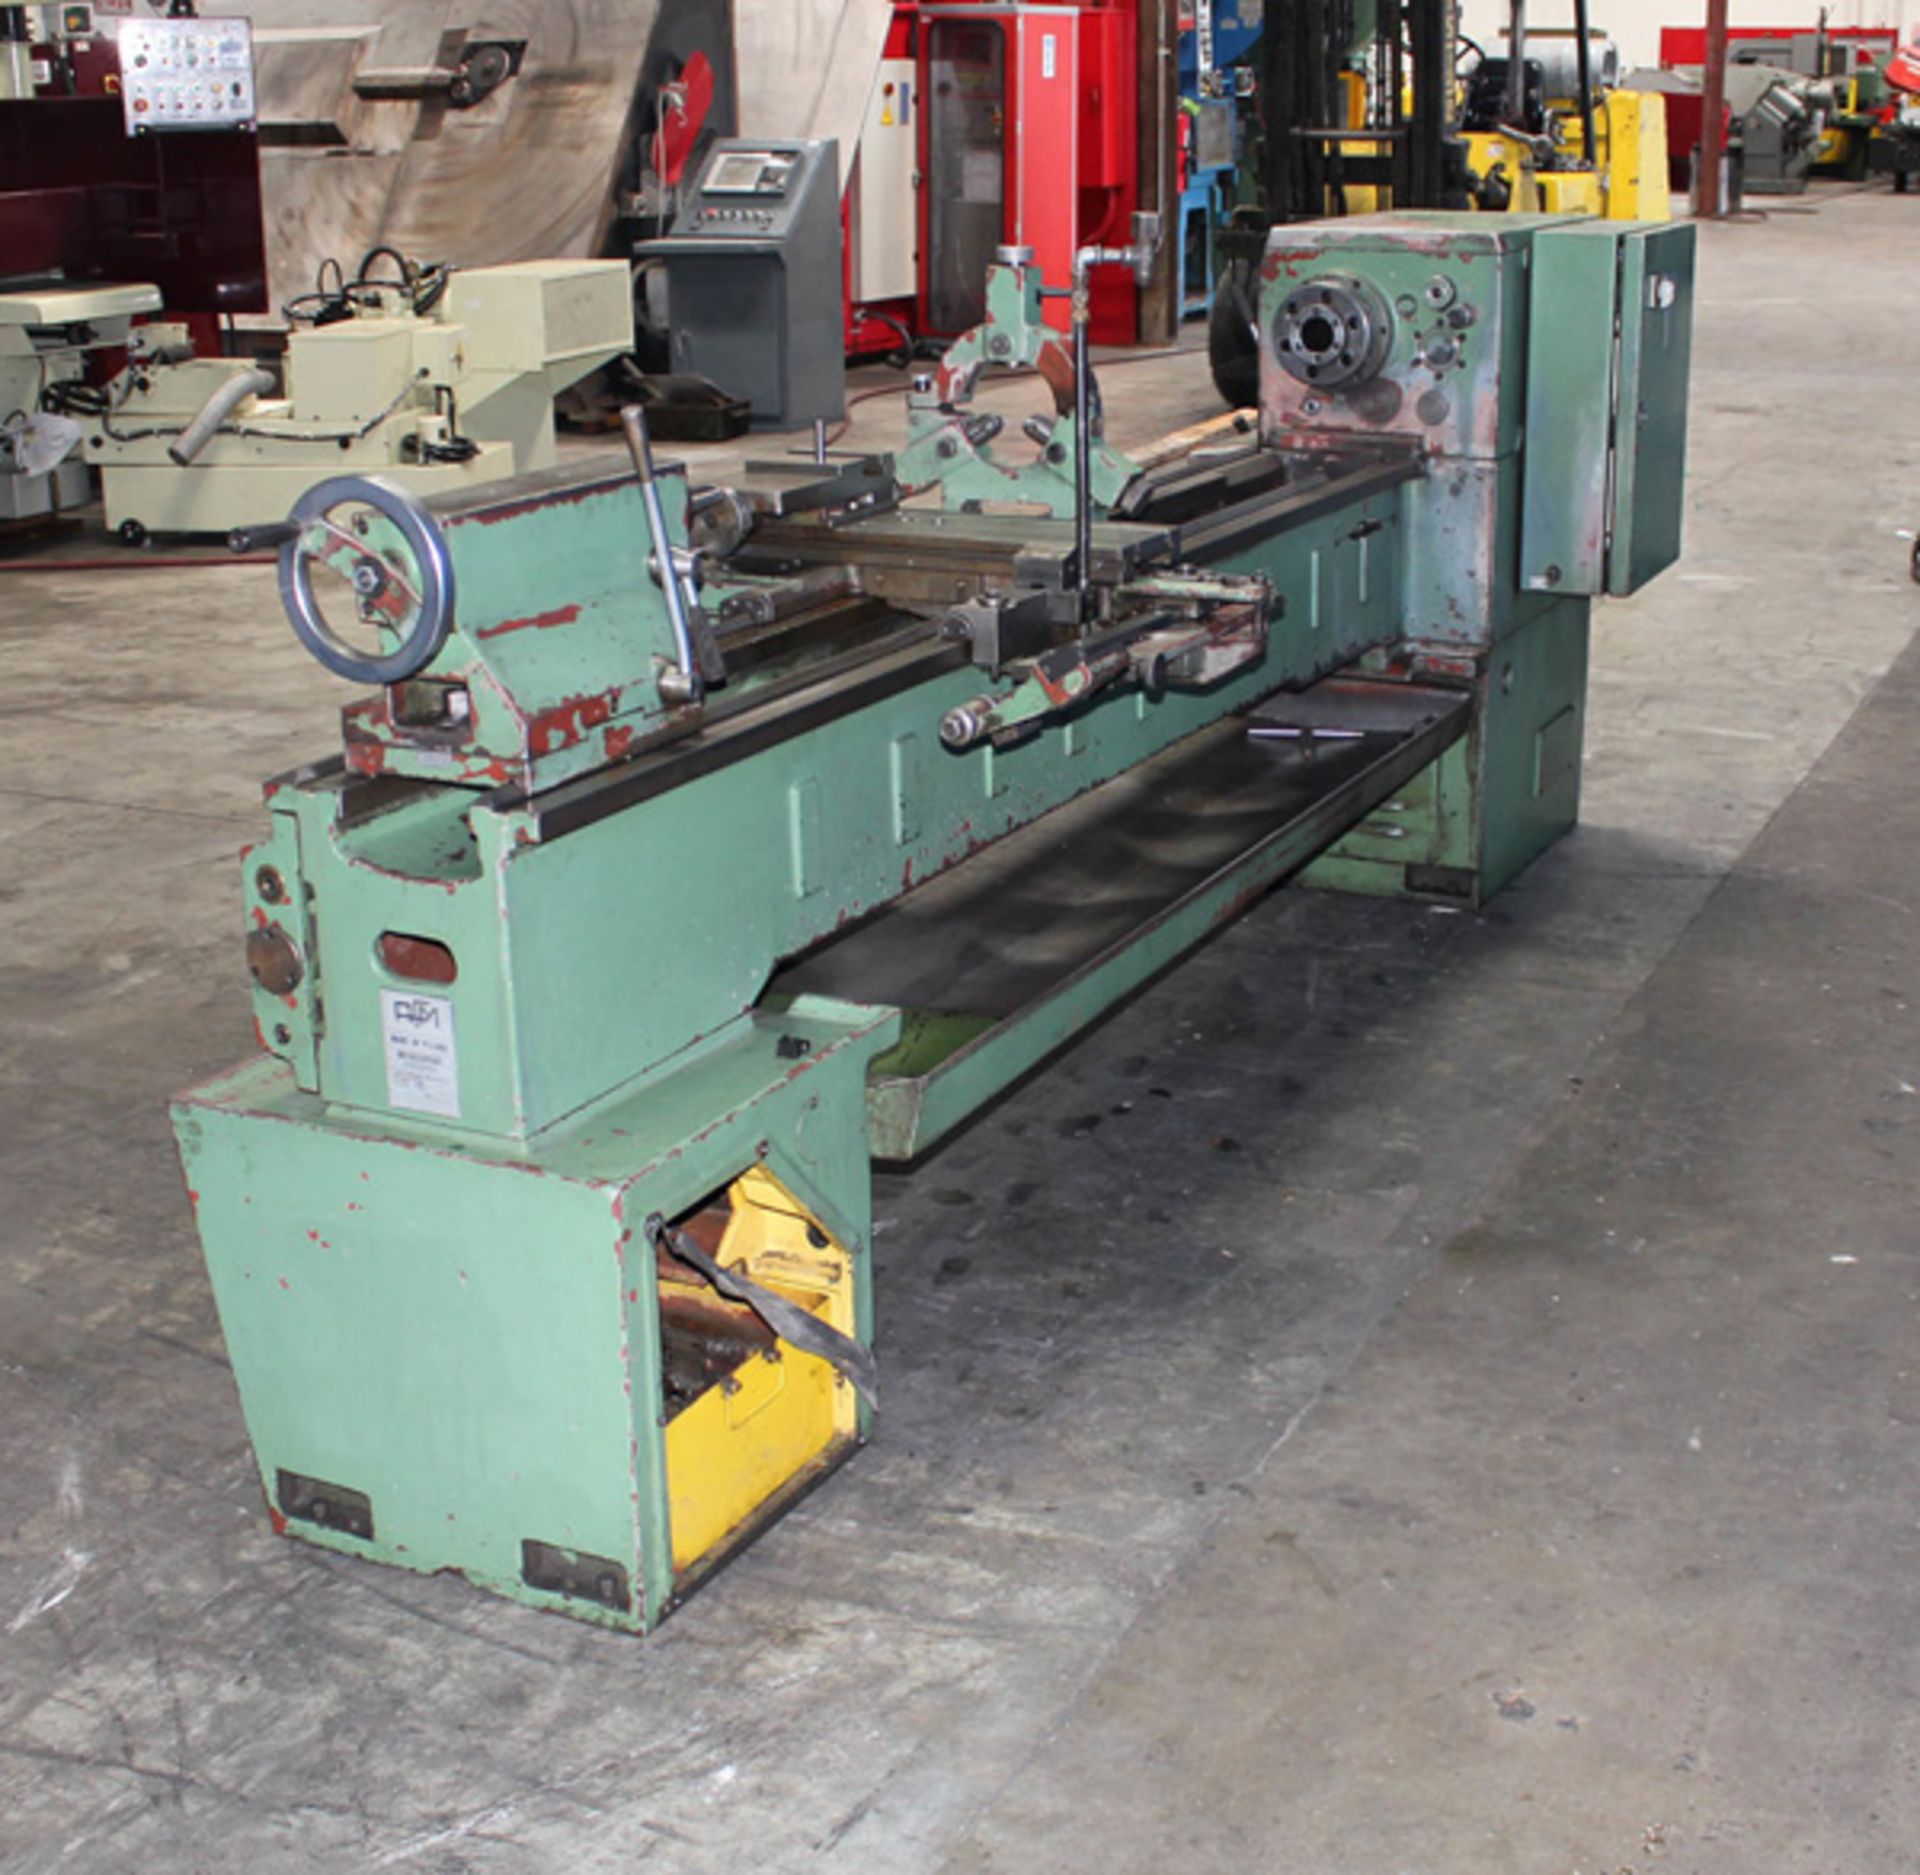 1981 AFM Andychow Engine Lathe | 18"/25" x 80", Mdl: TUG-40, S/N: 4079 - 4774HP - Image 4 of 7